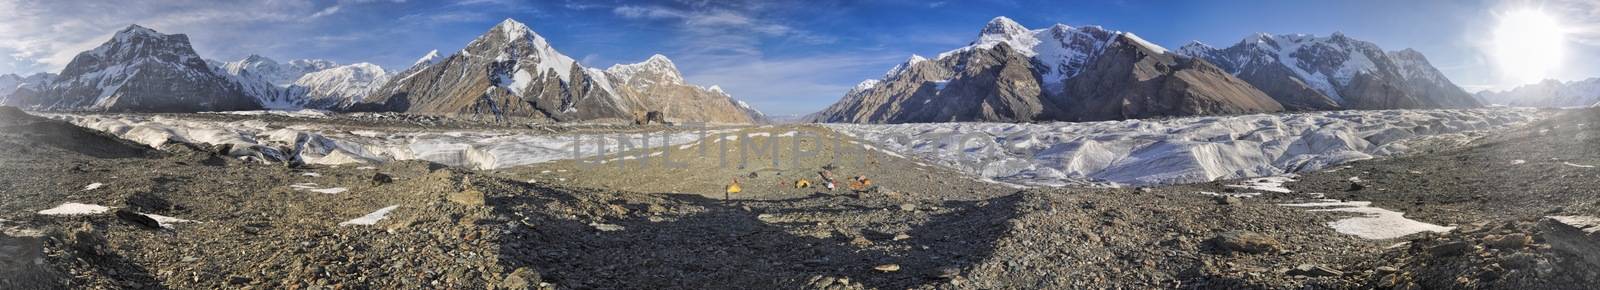 Scenic panorama of campsite on Engilchek glacier in picturesque Tian Shan mountain range in Kyrgyzstan